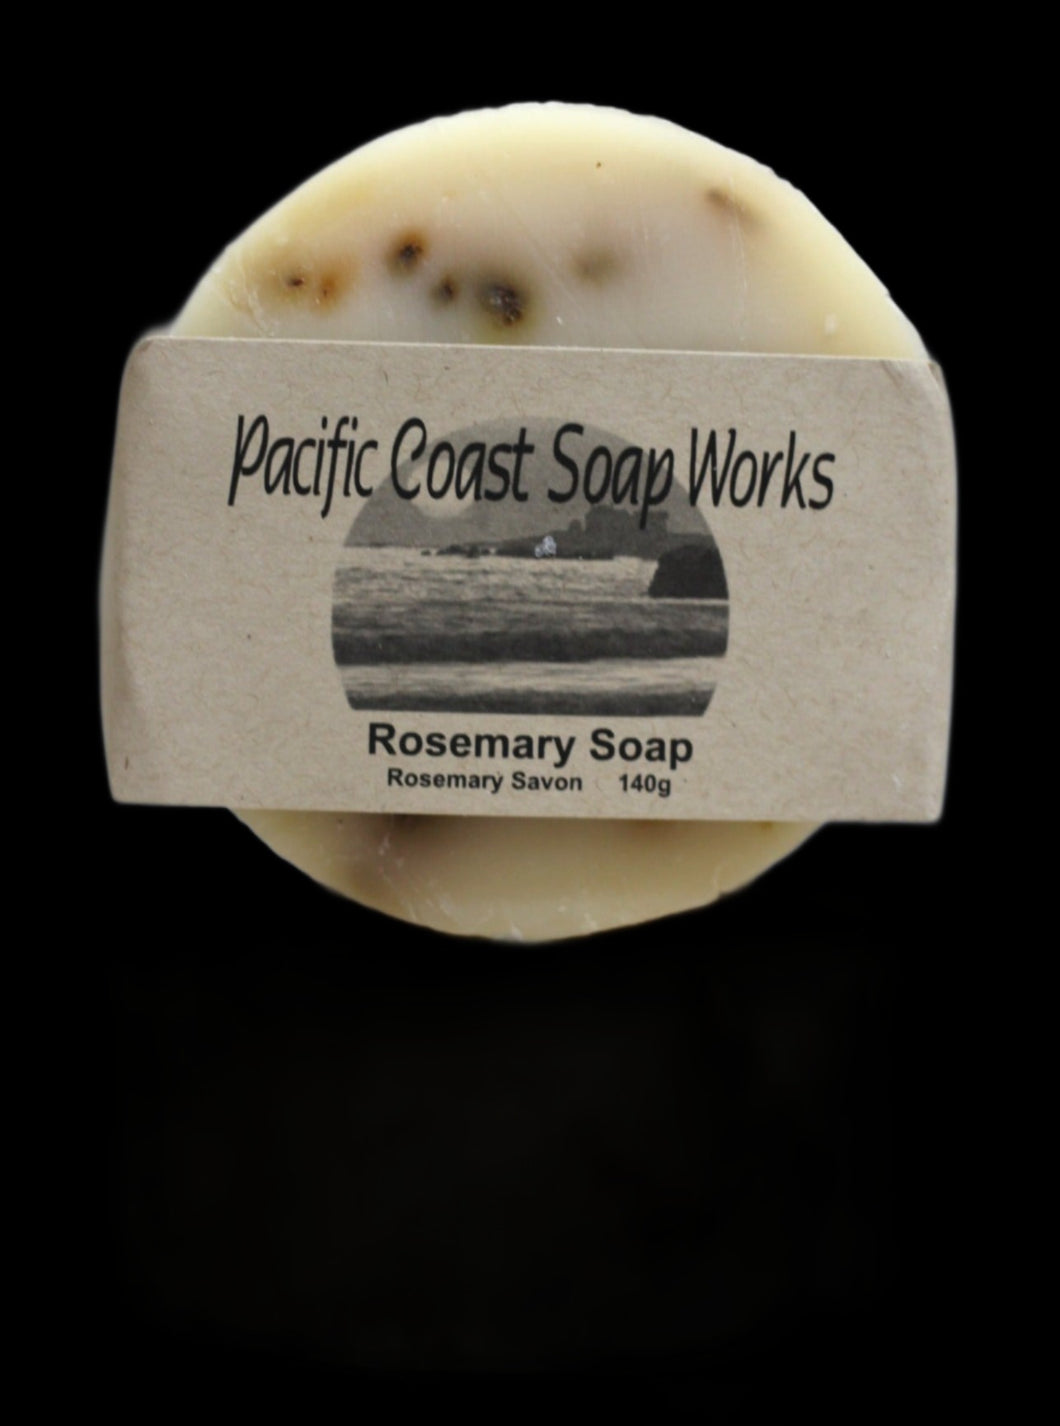 rosemary soap bar. handcrafted soap. handmade soap vancouver. soap works